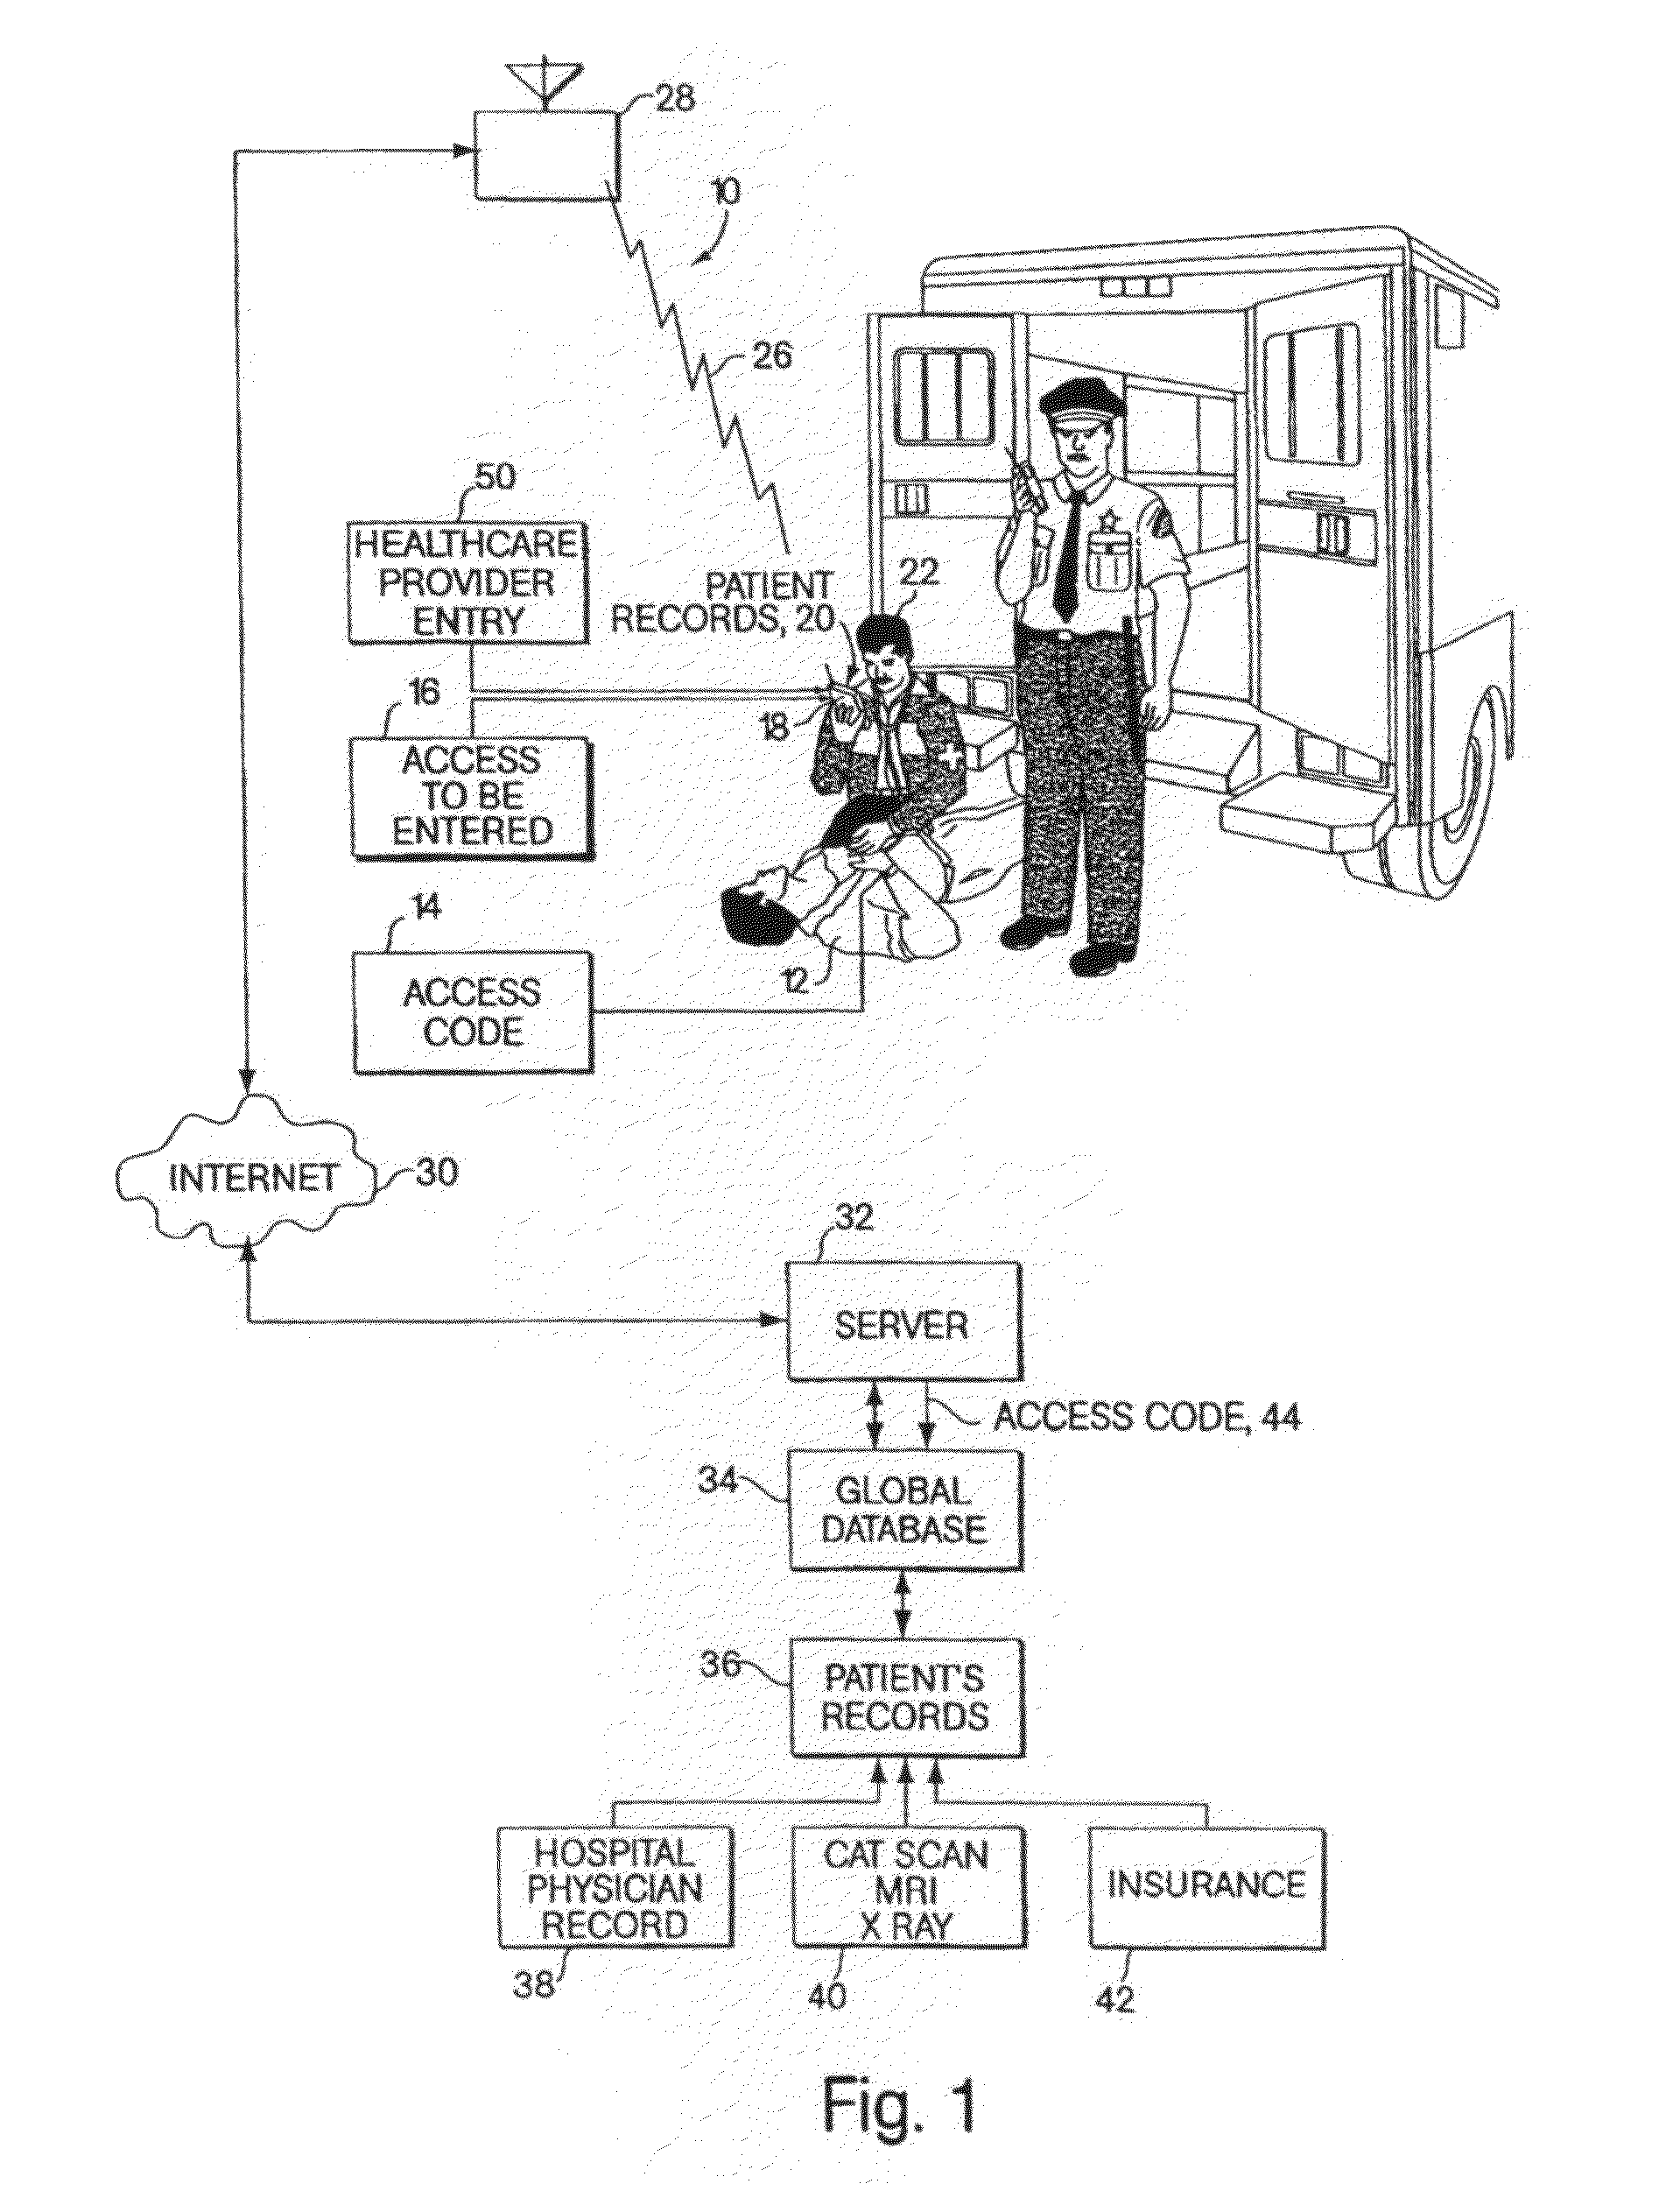 Method using a global server for providing patient medical histories to assist in the delivery of emergency medical services